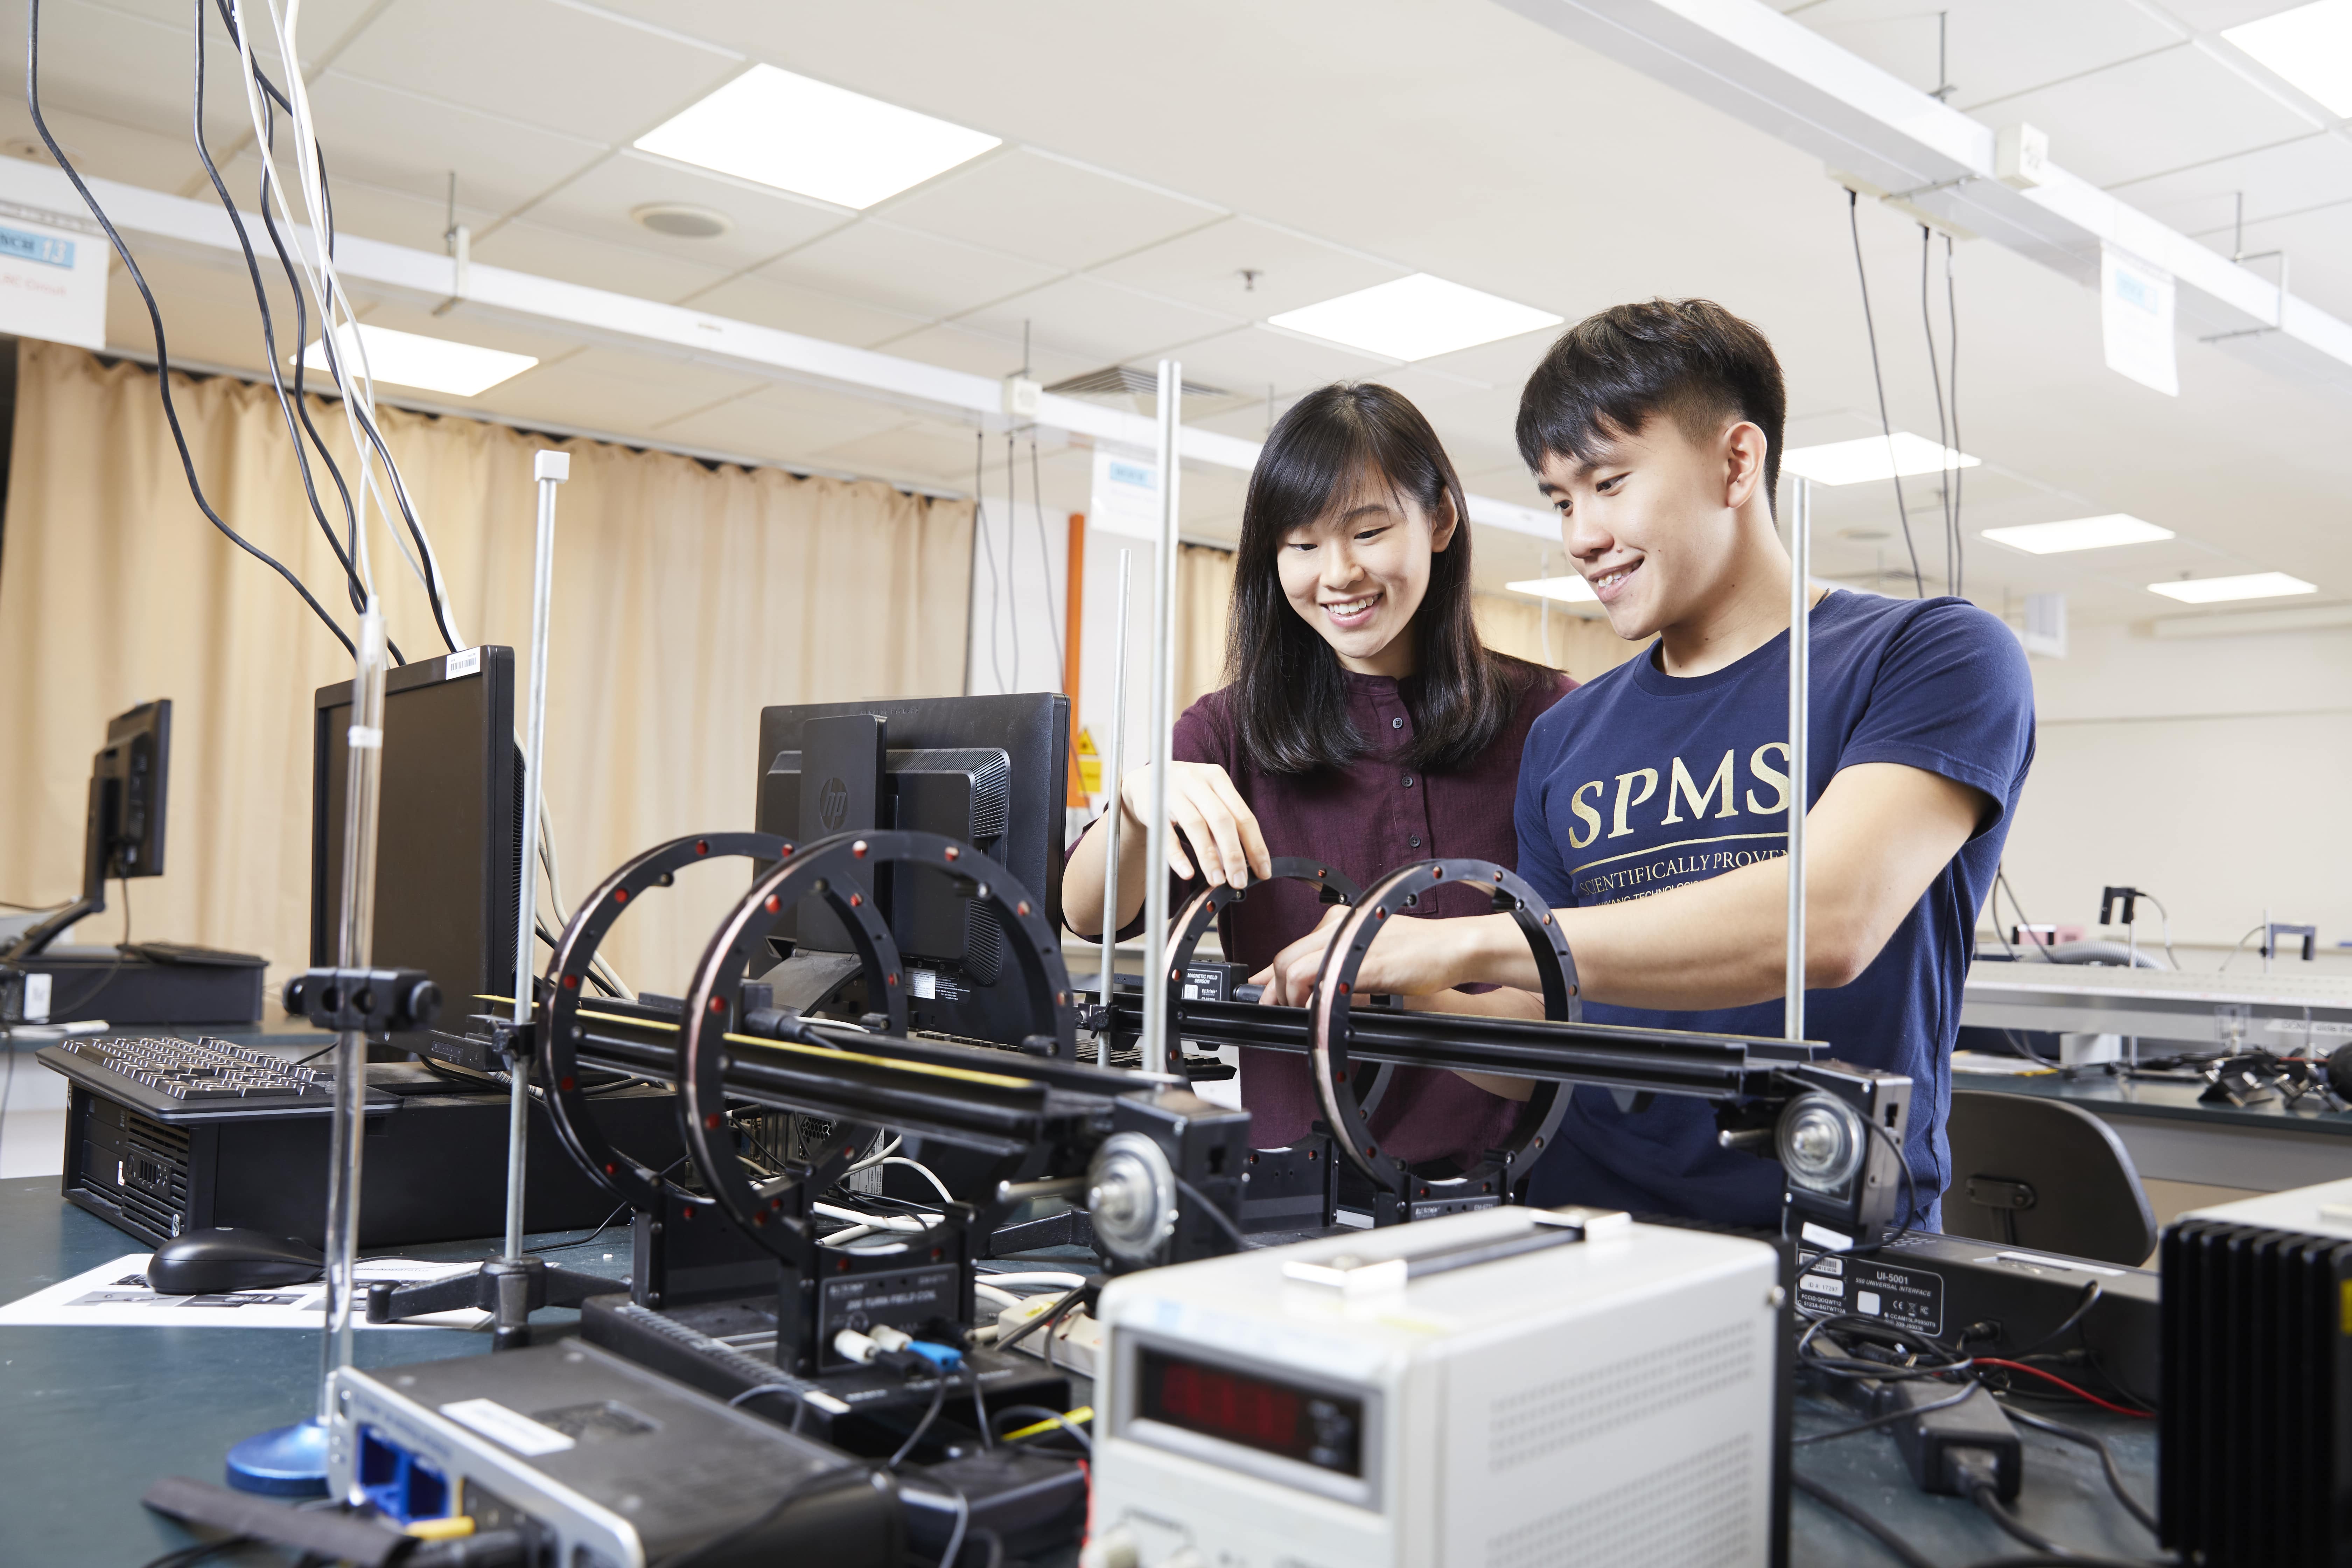 Two students in a SPMS lab